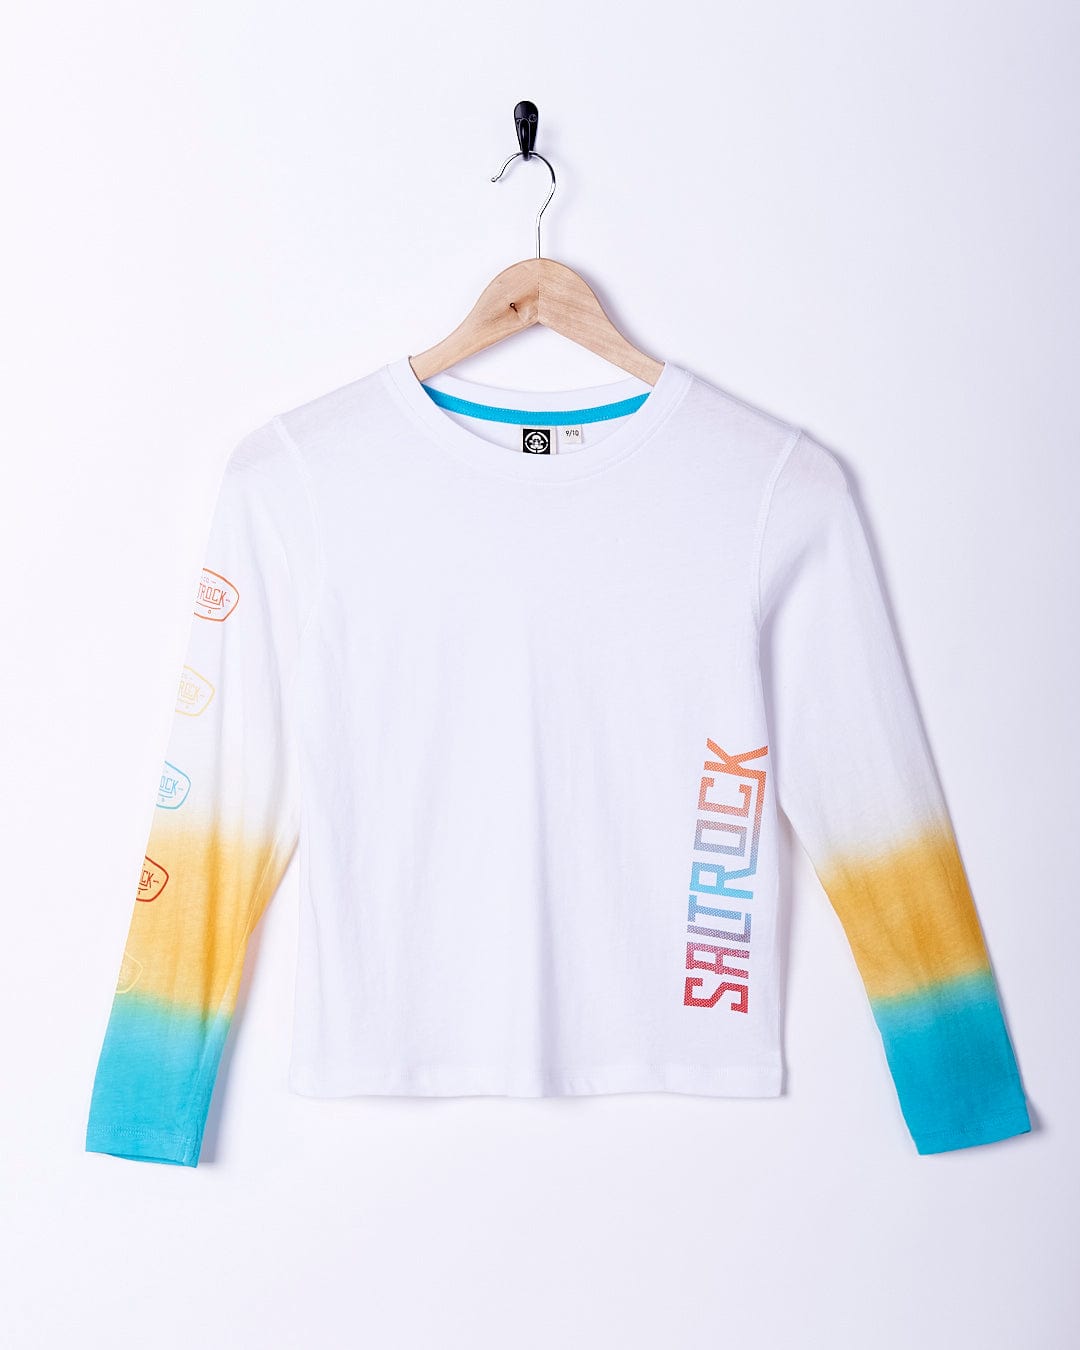 A Saltrock Marcus - Kids Long Sleeve Dip Dye T-Shirt - White with a colorful design.